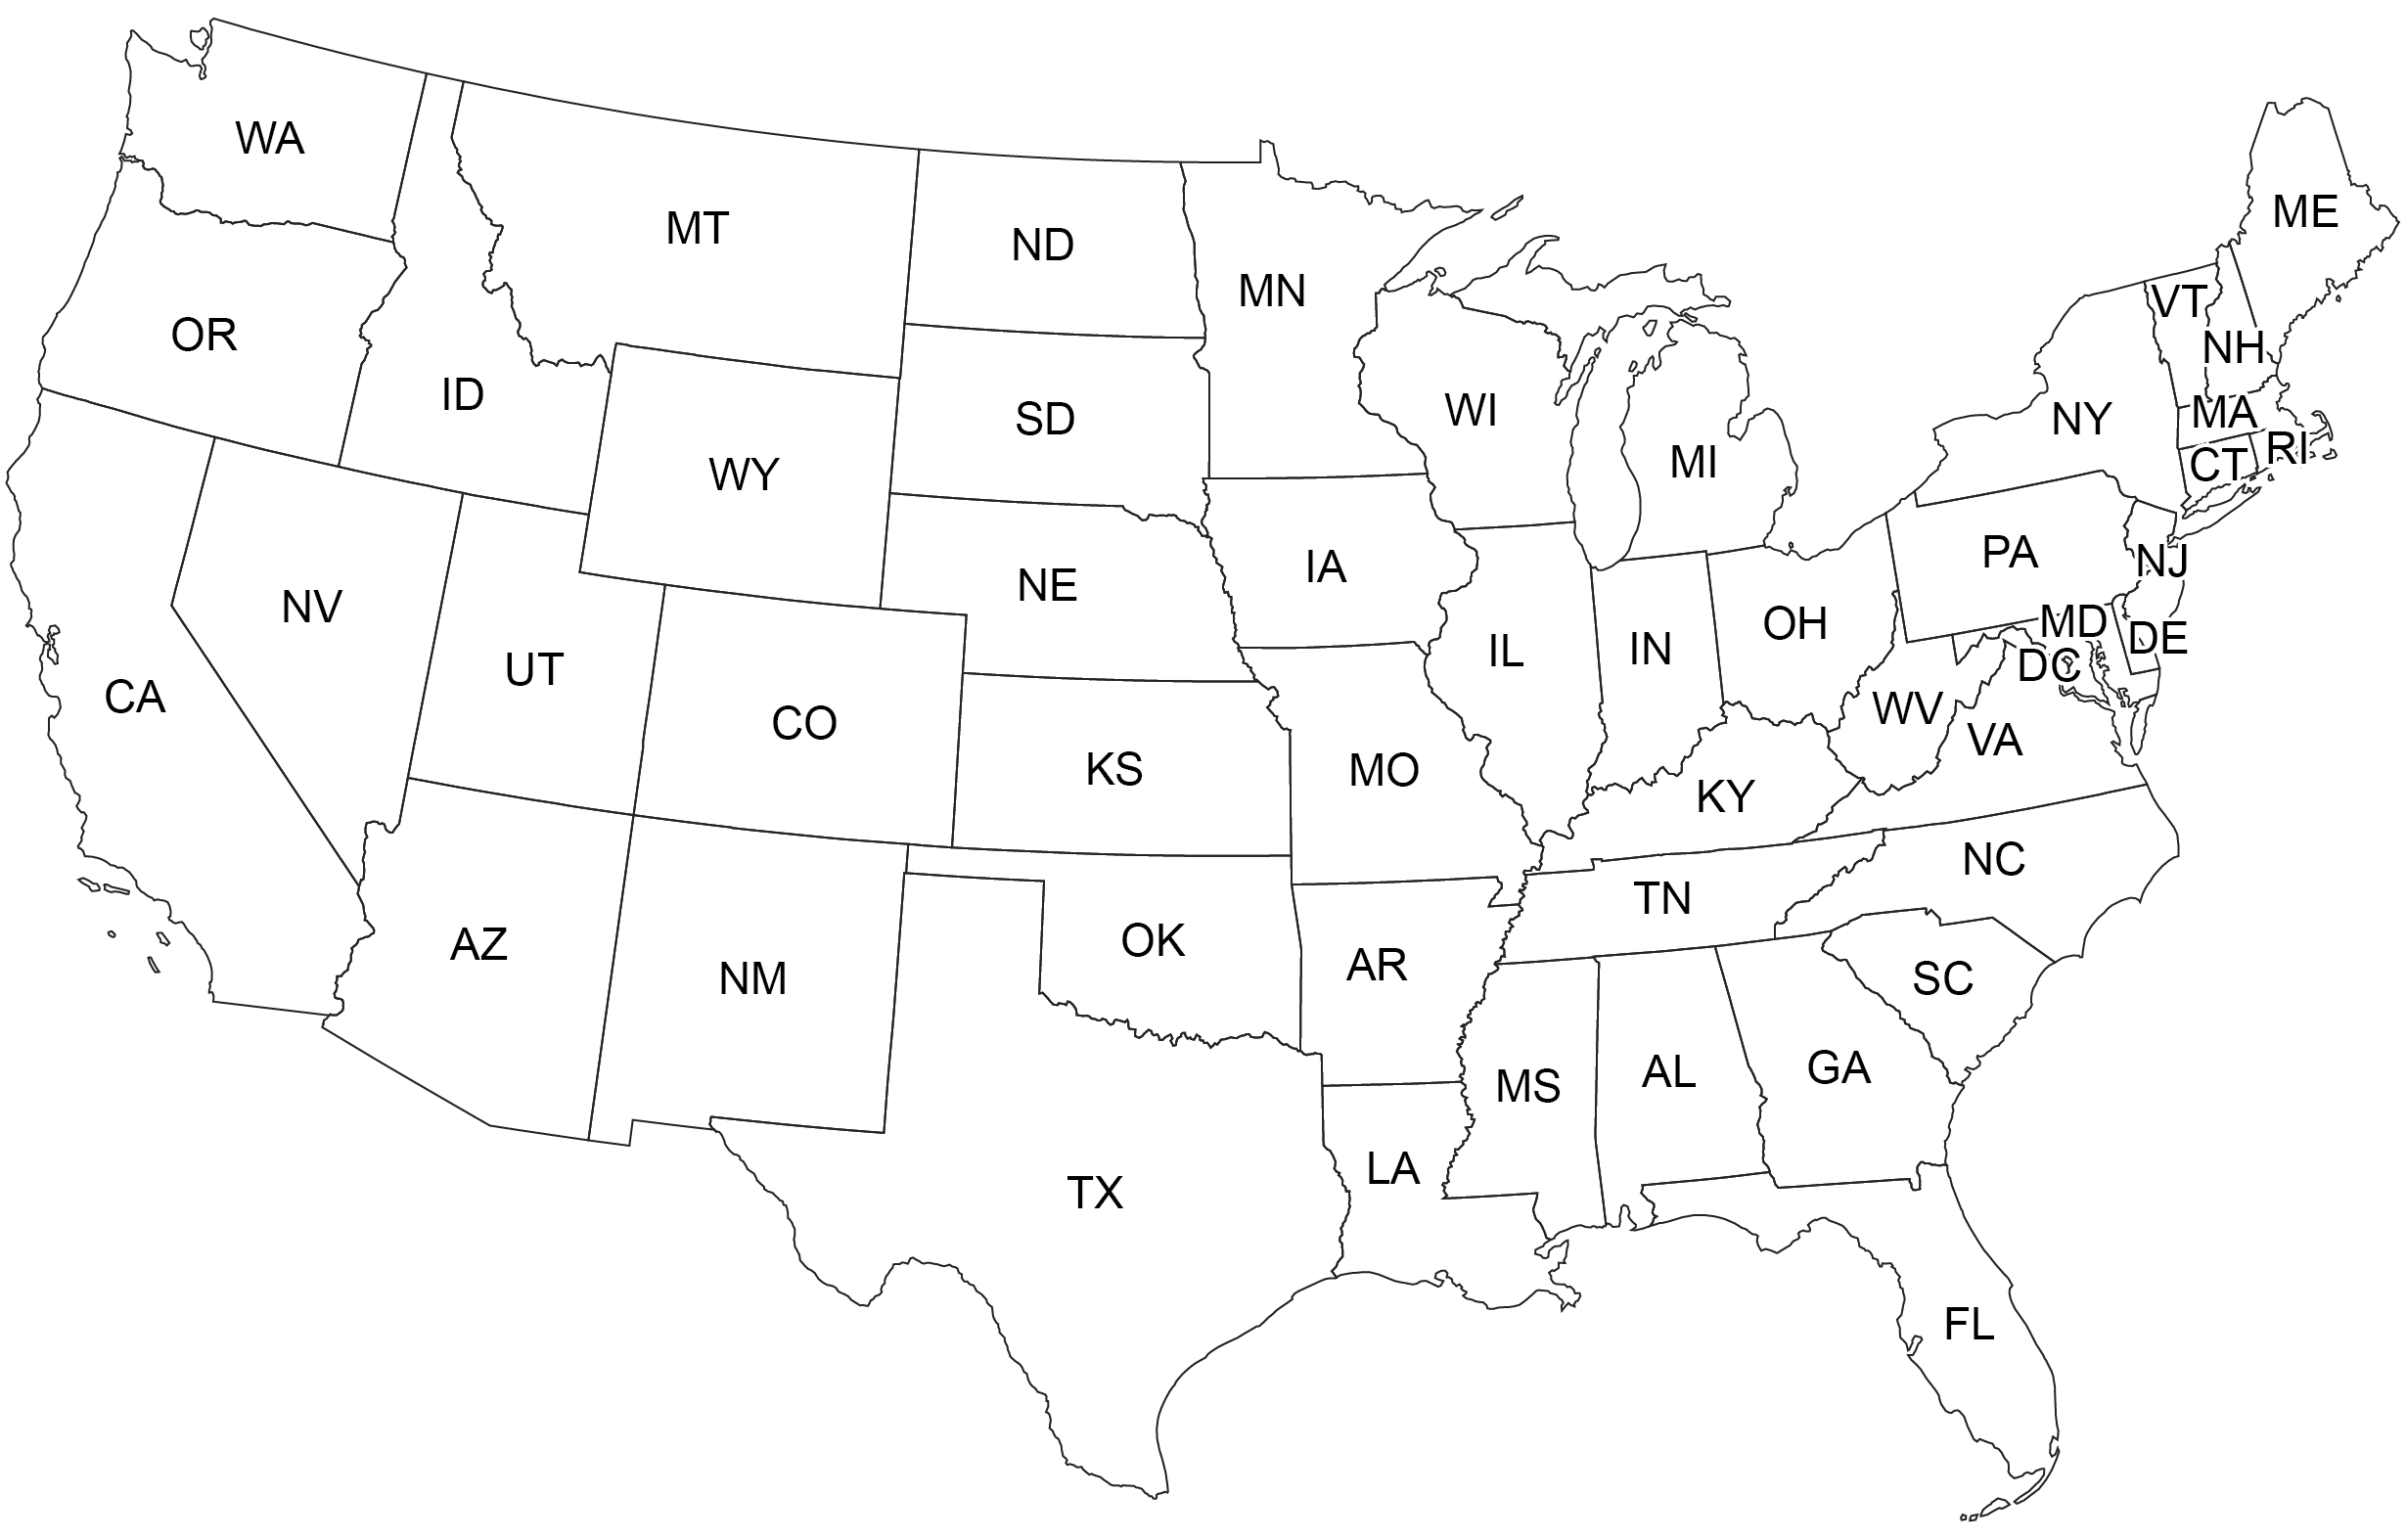 A map of the U.S. with state borders.